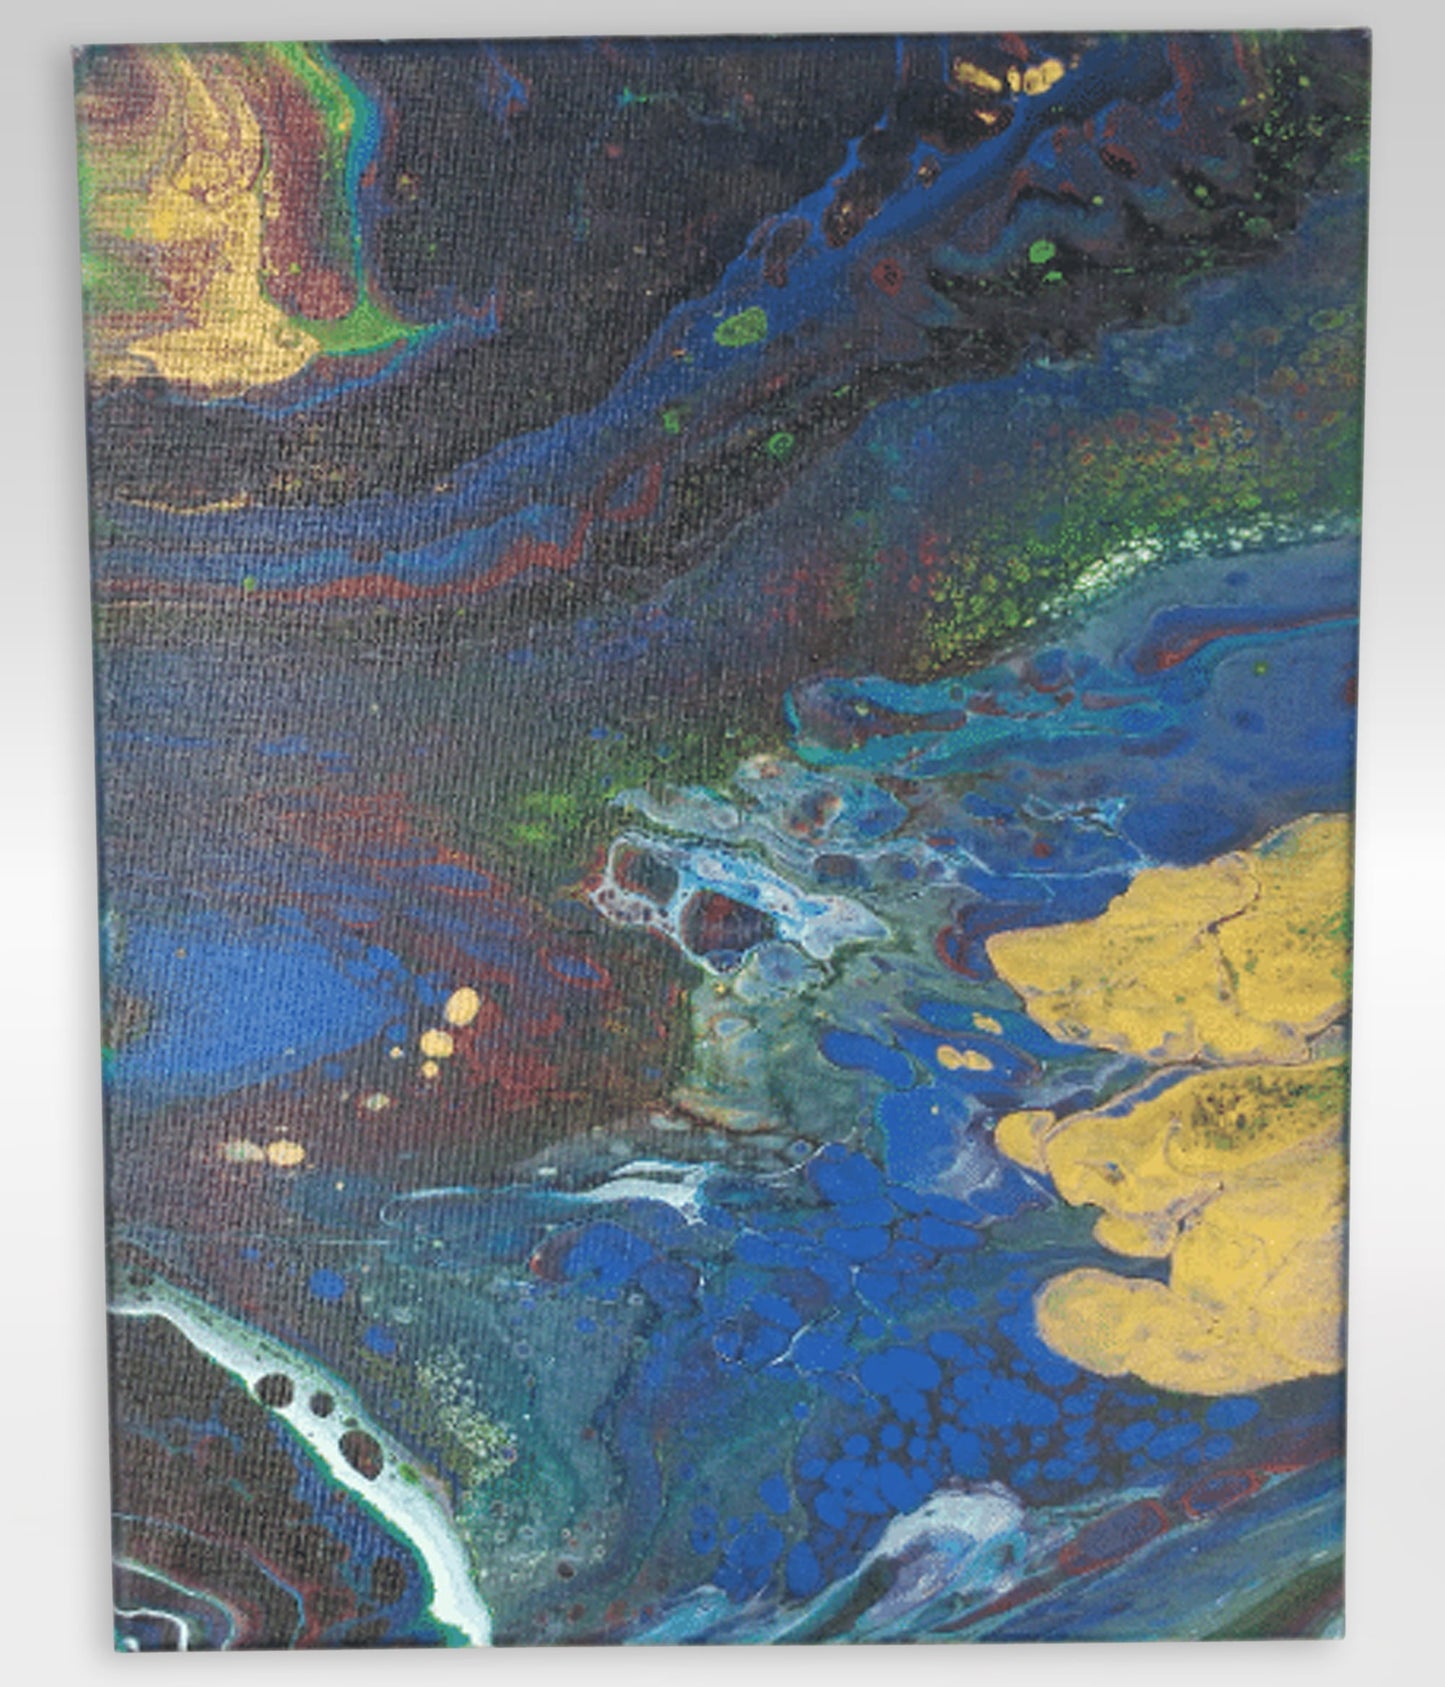 Space Pond – 11 x 14 Acrylic Pour Painting On Canvas